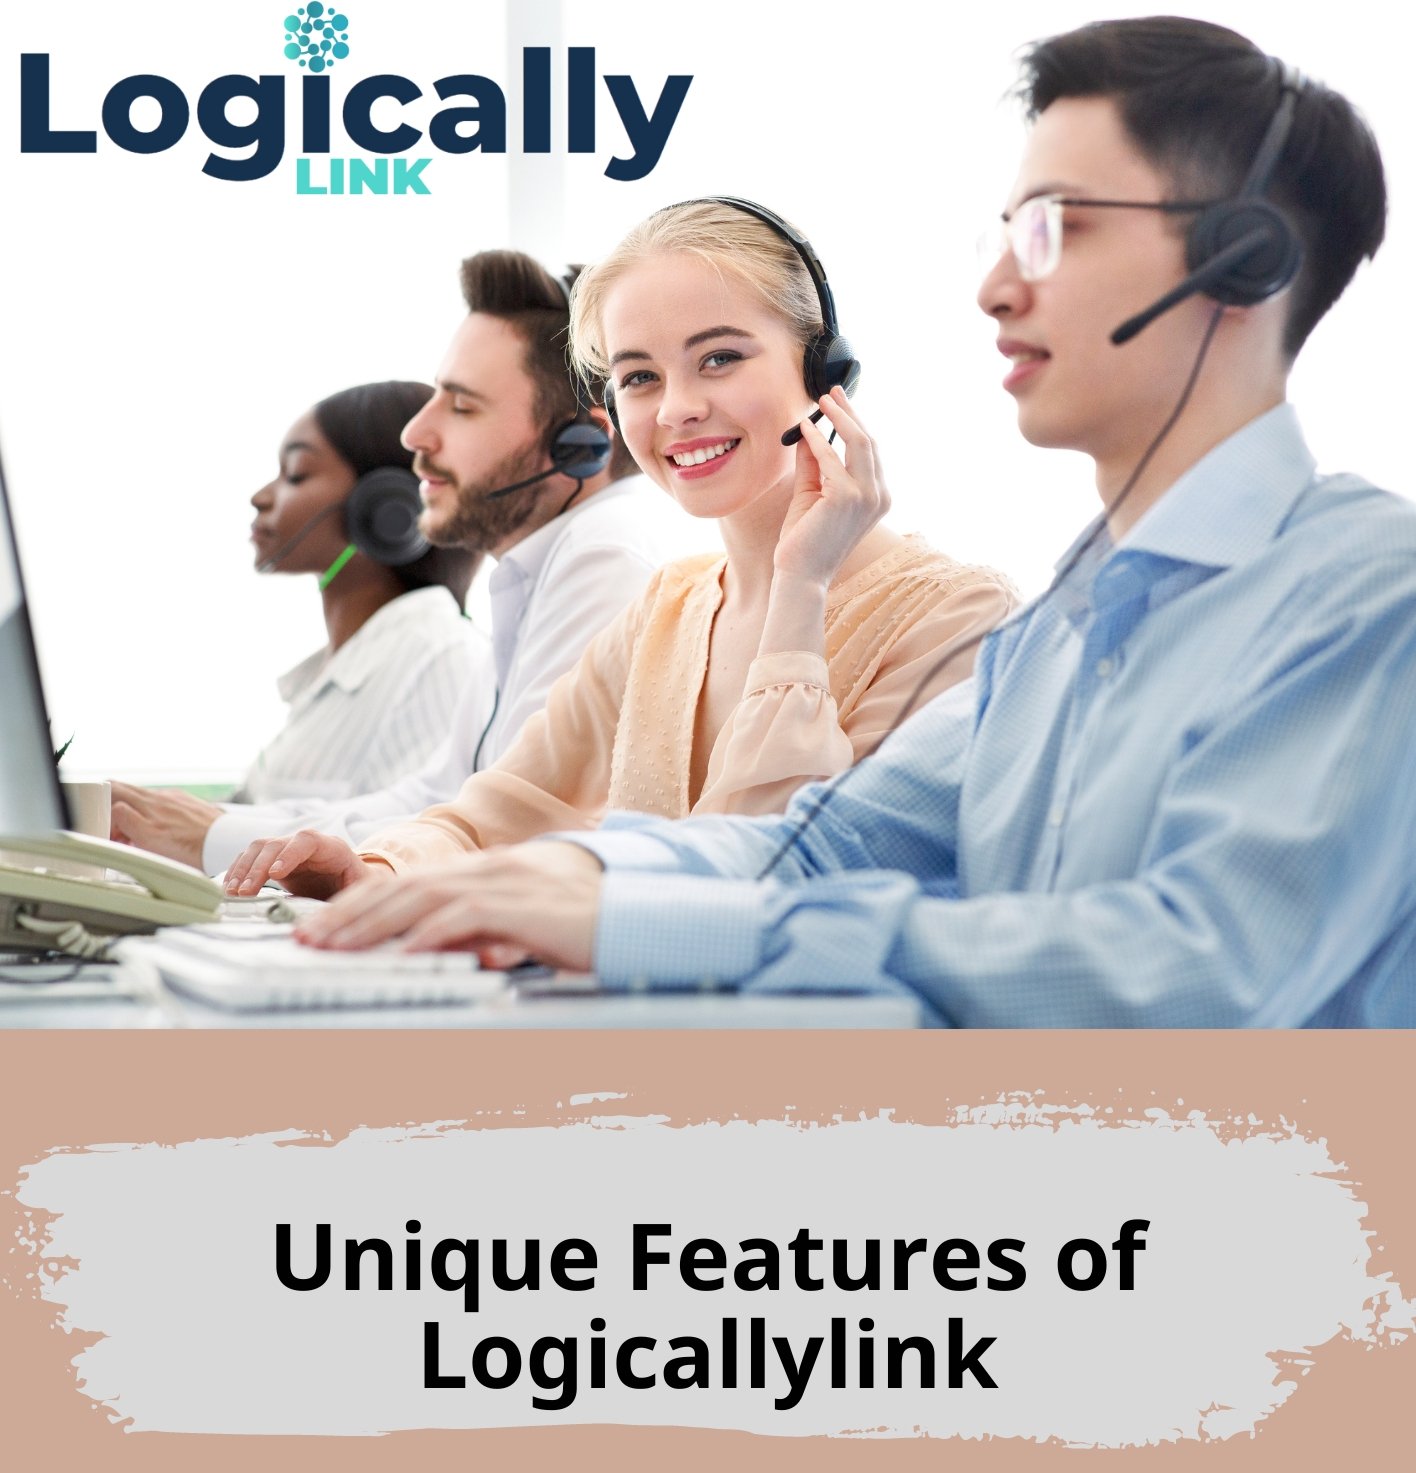 Unique Features of Logicallylink